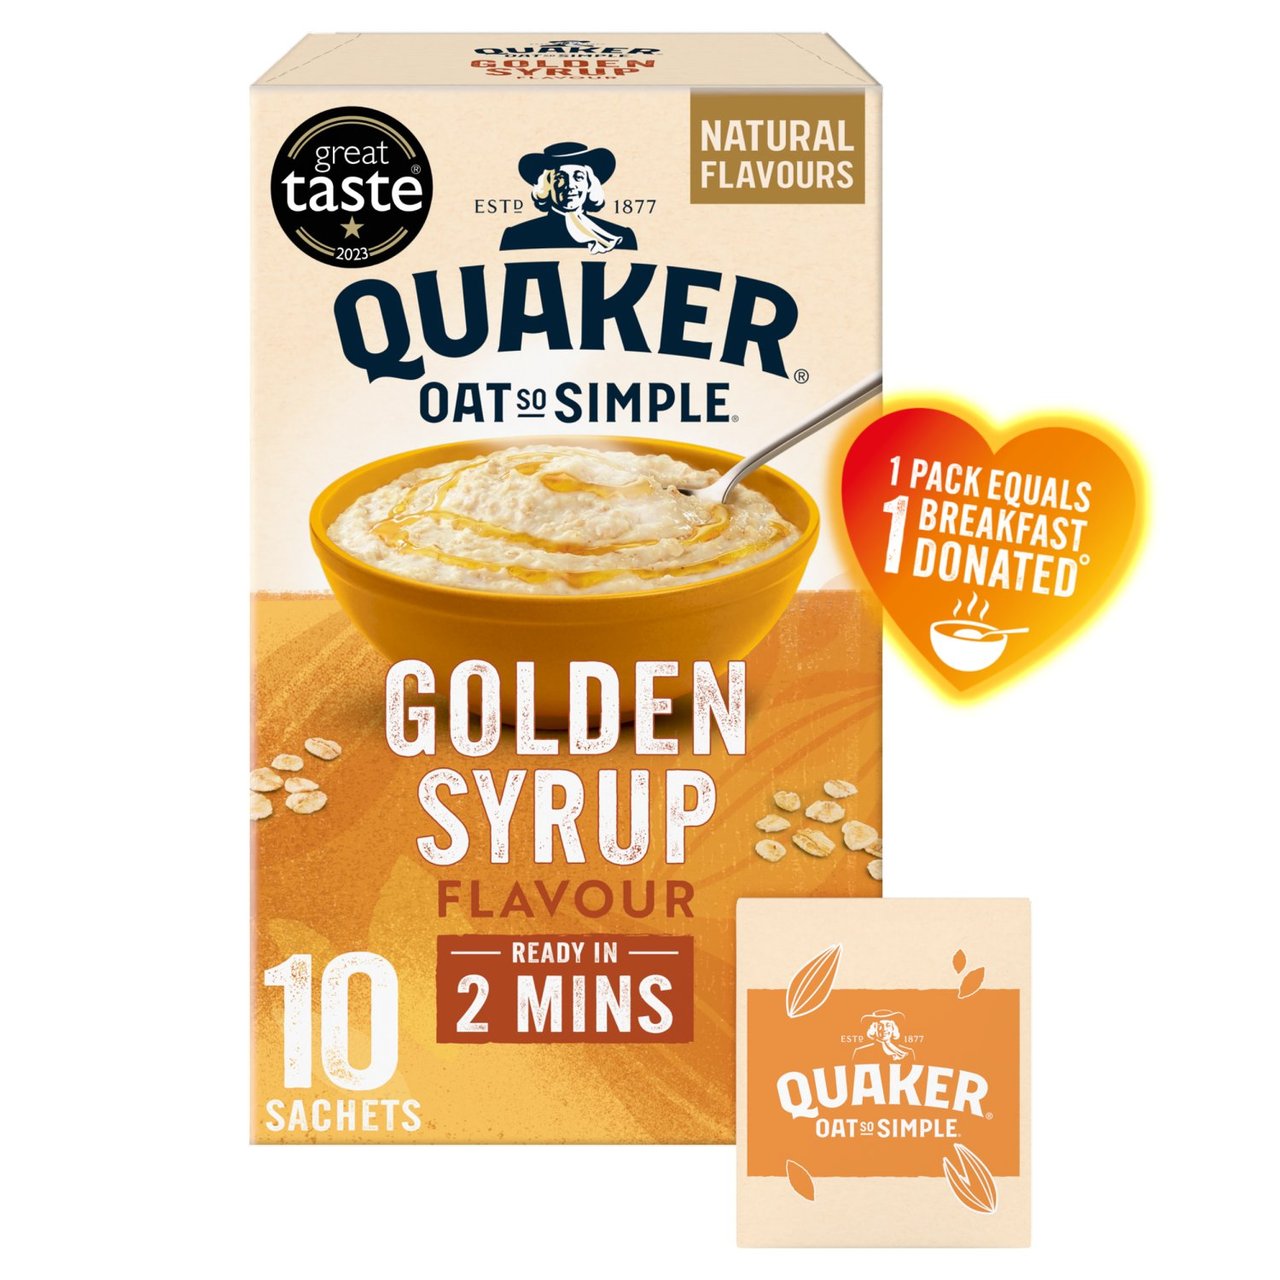 Quaker Oat so Simple Golden Syrup 10 x 36g